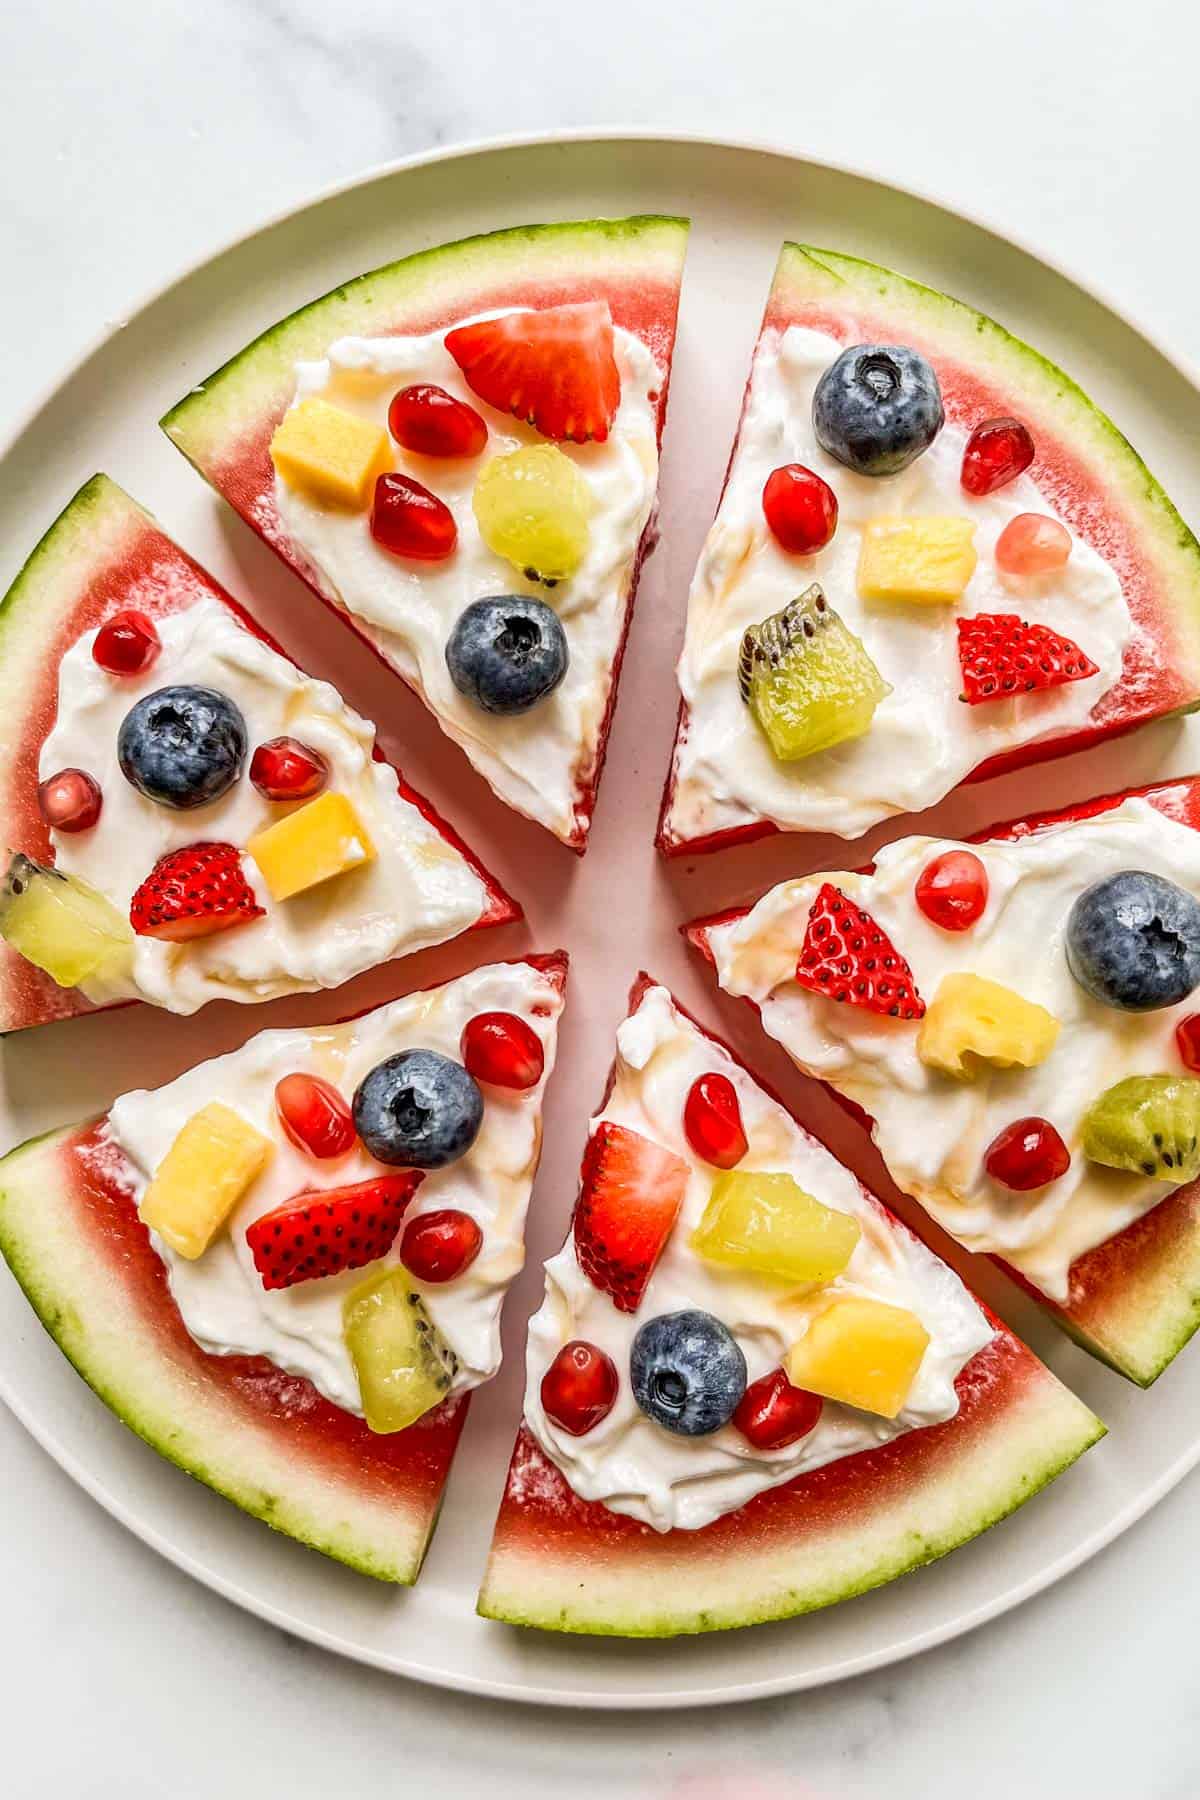 Watermelon pizza with small pieces of fruit and berries on a white plate.